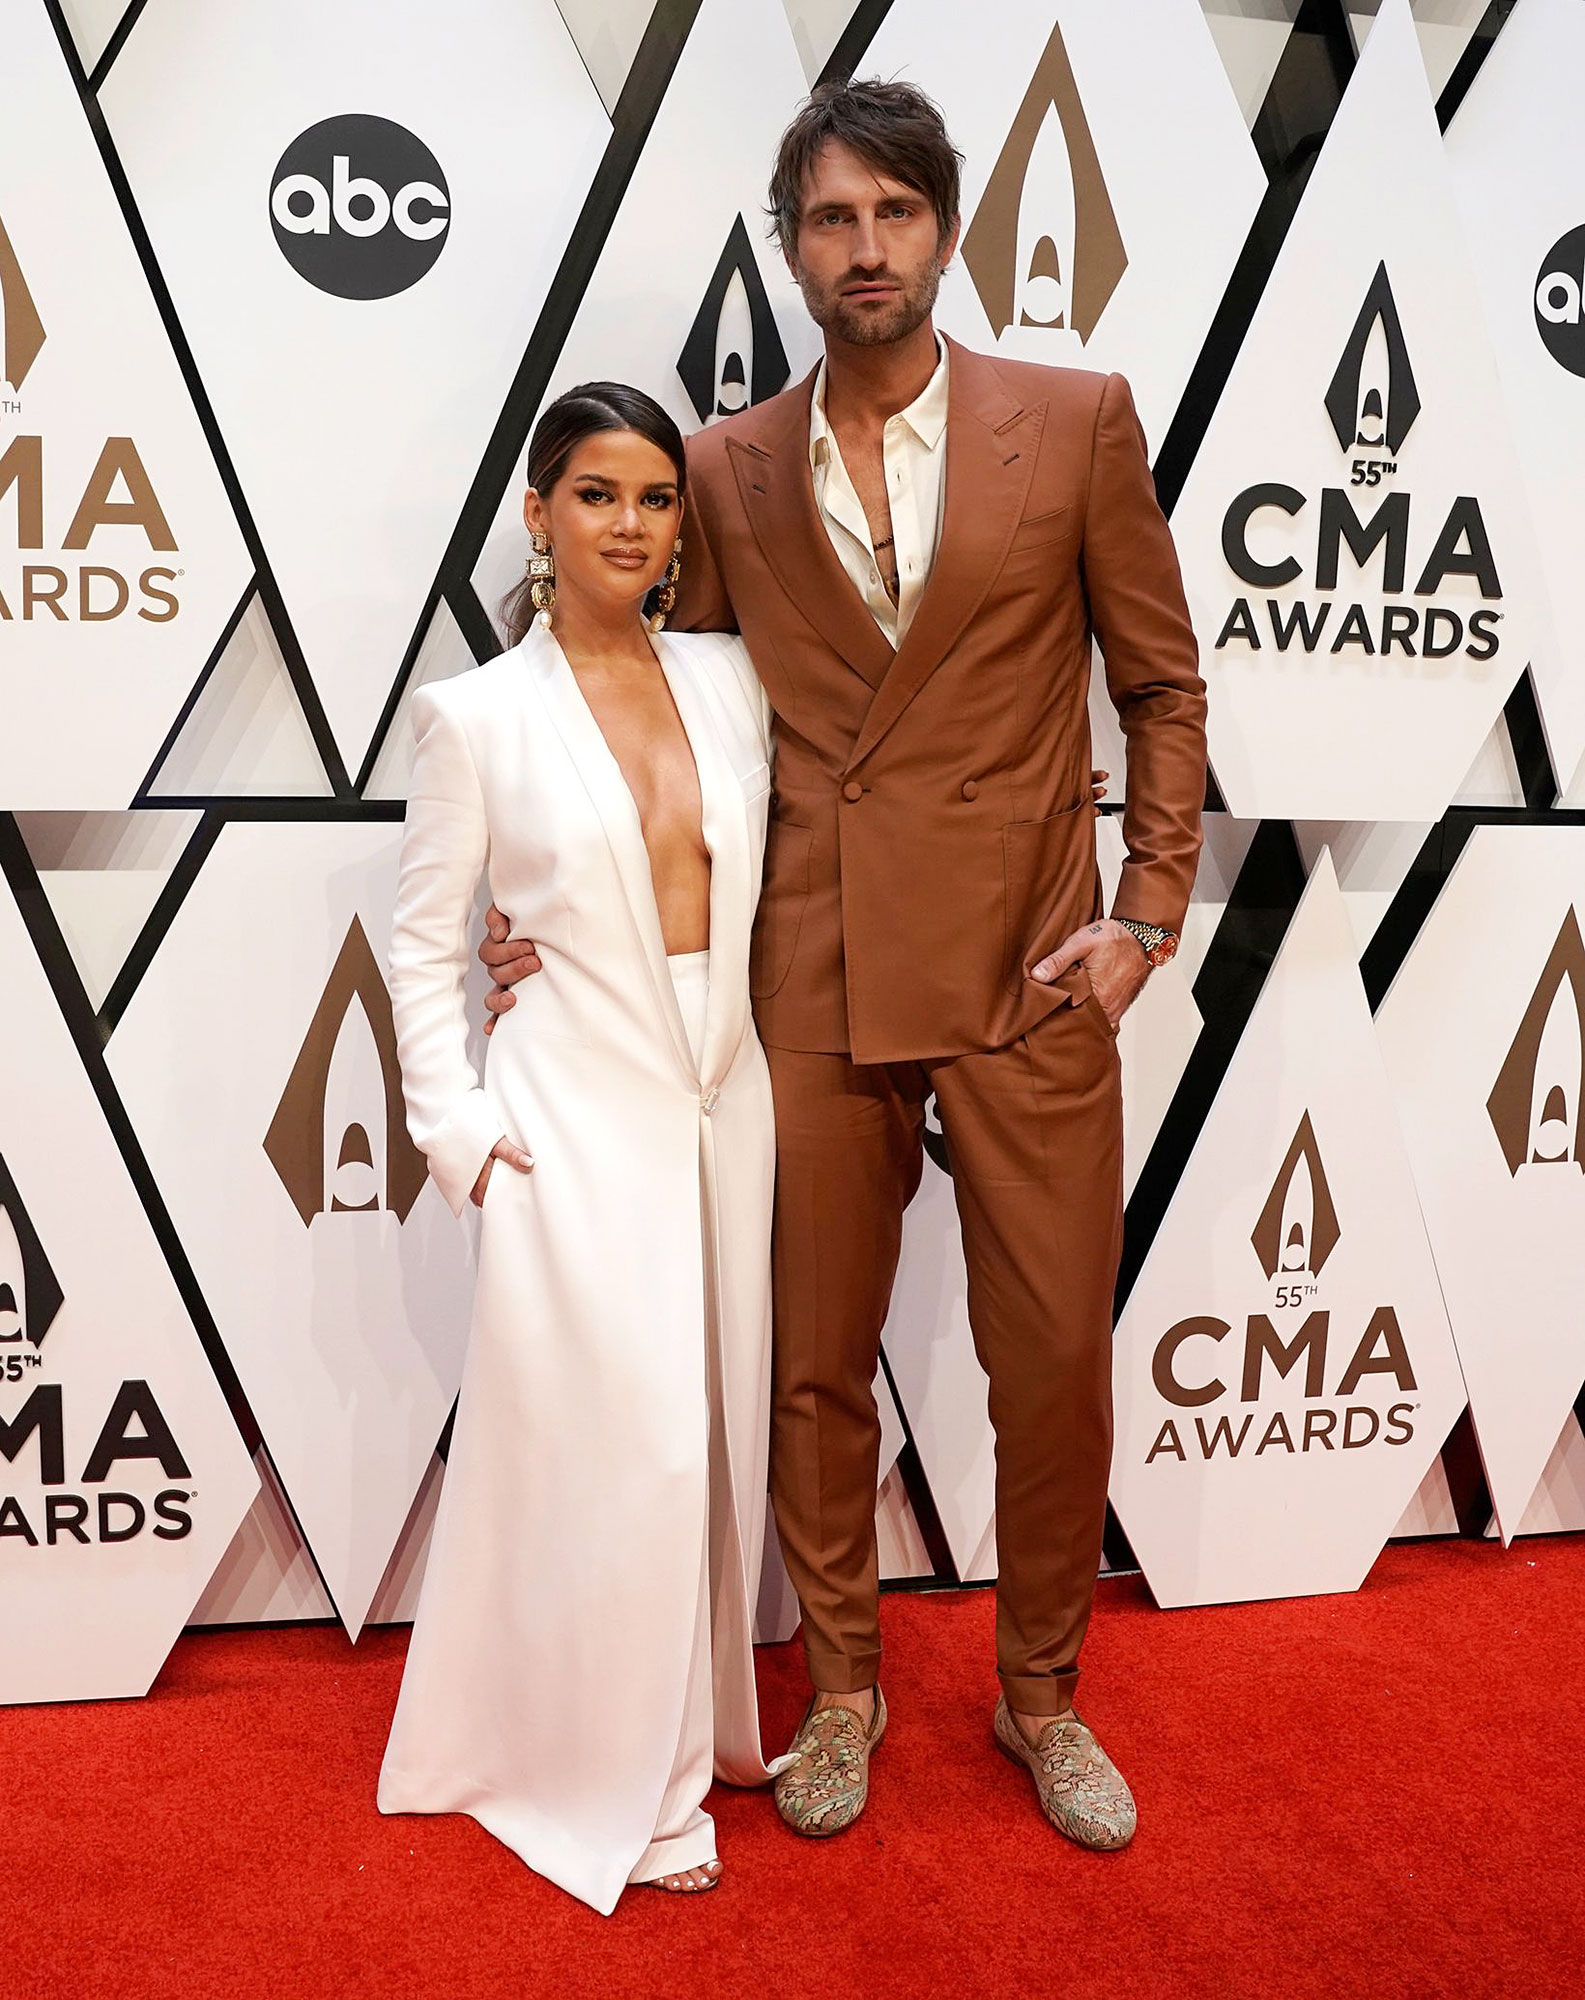 CMAs 2021: Carrie Underwood, Mike Fisher, More Couples Attend